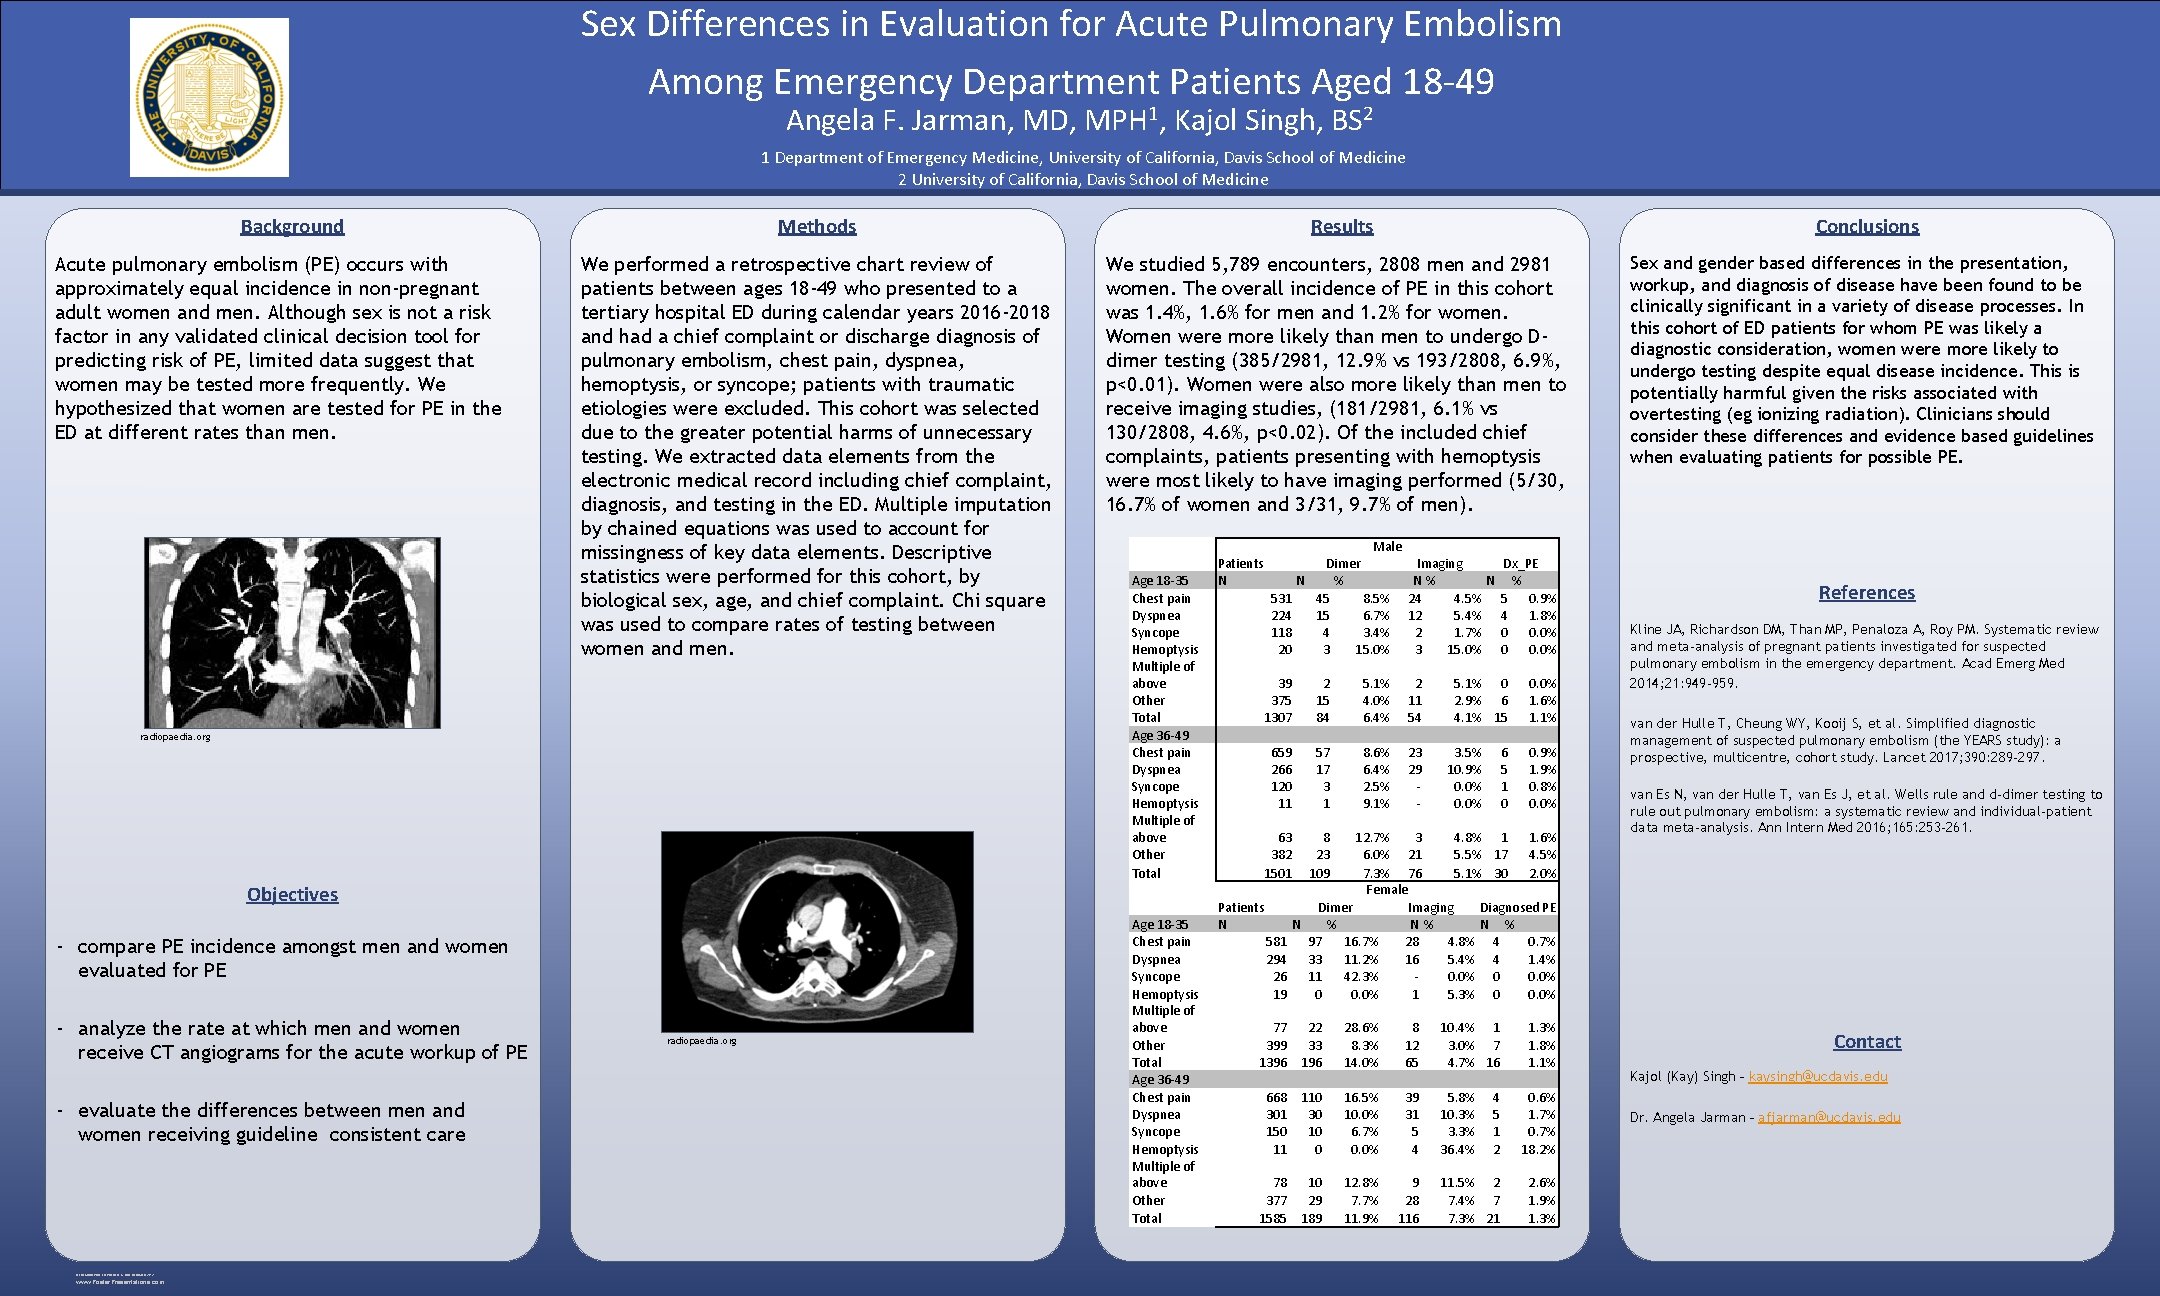 Sex Differences in Evaluation for Acute Pulmonary Embolism Among Emergency Department Patients Aged 18